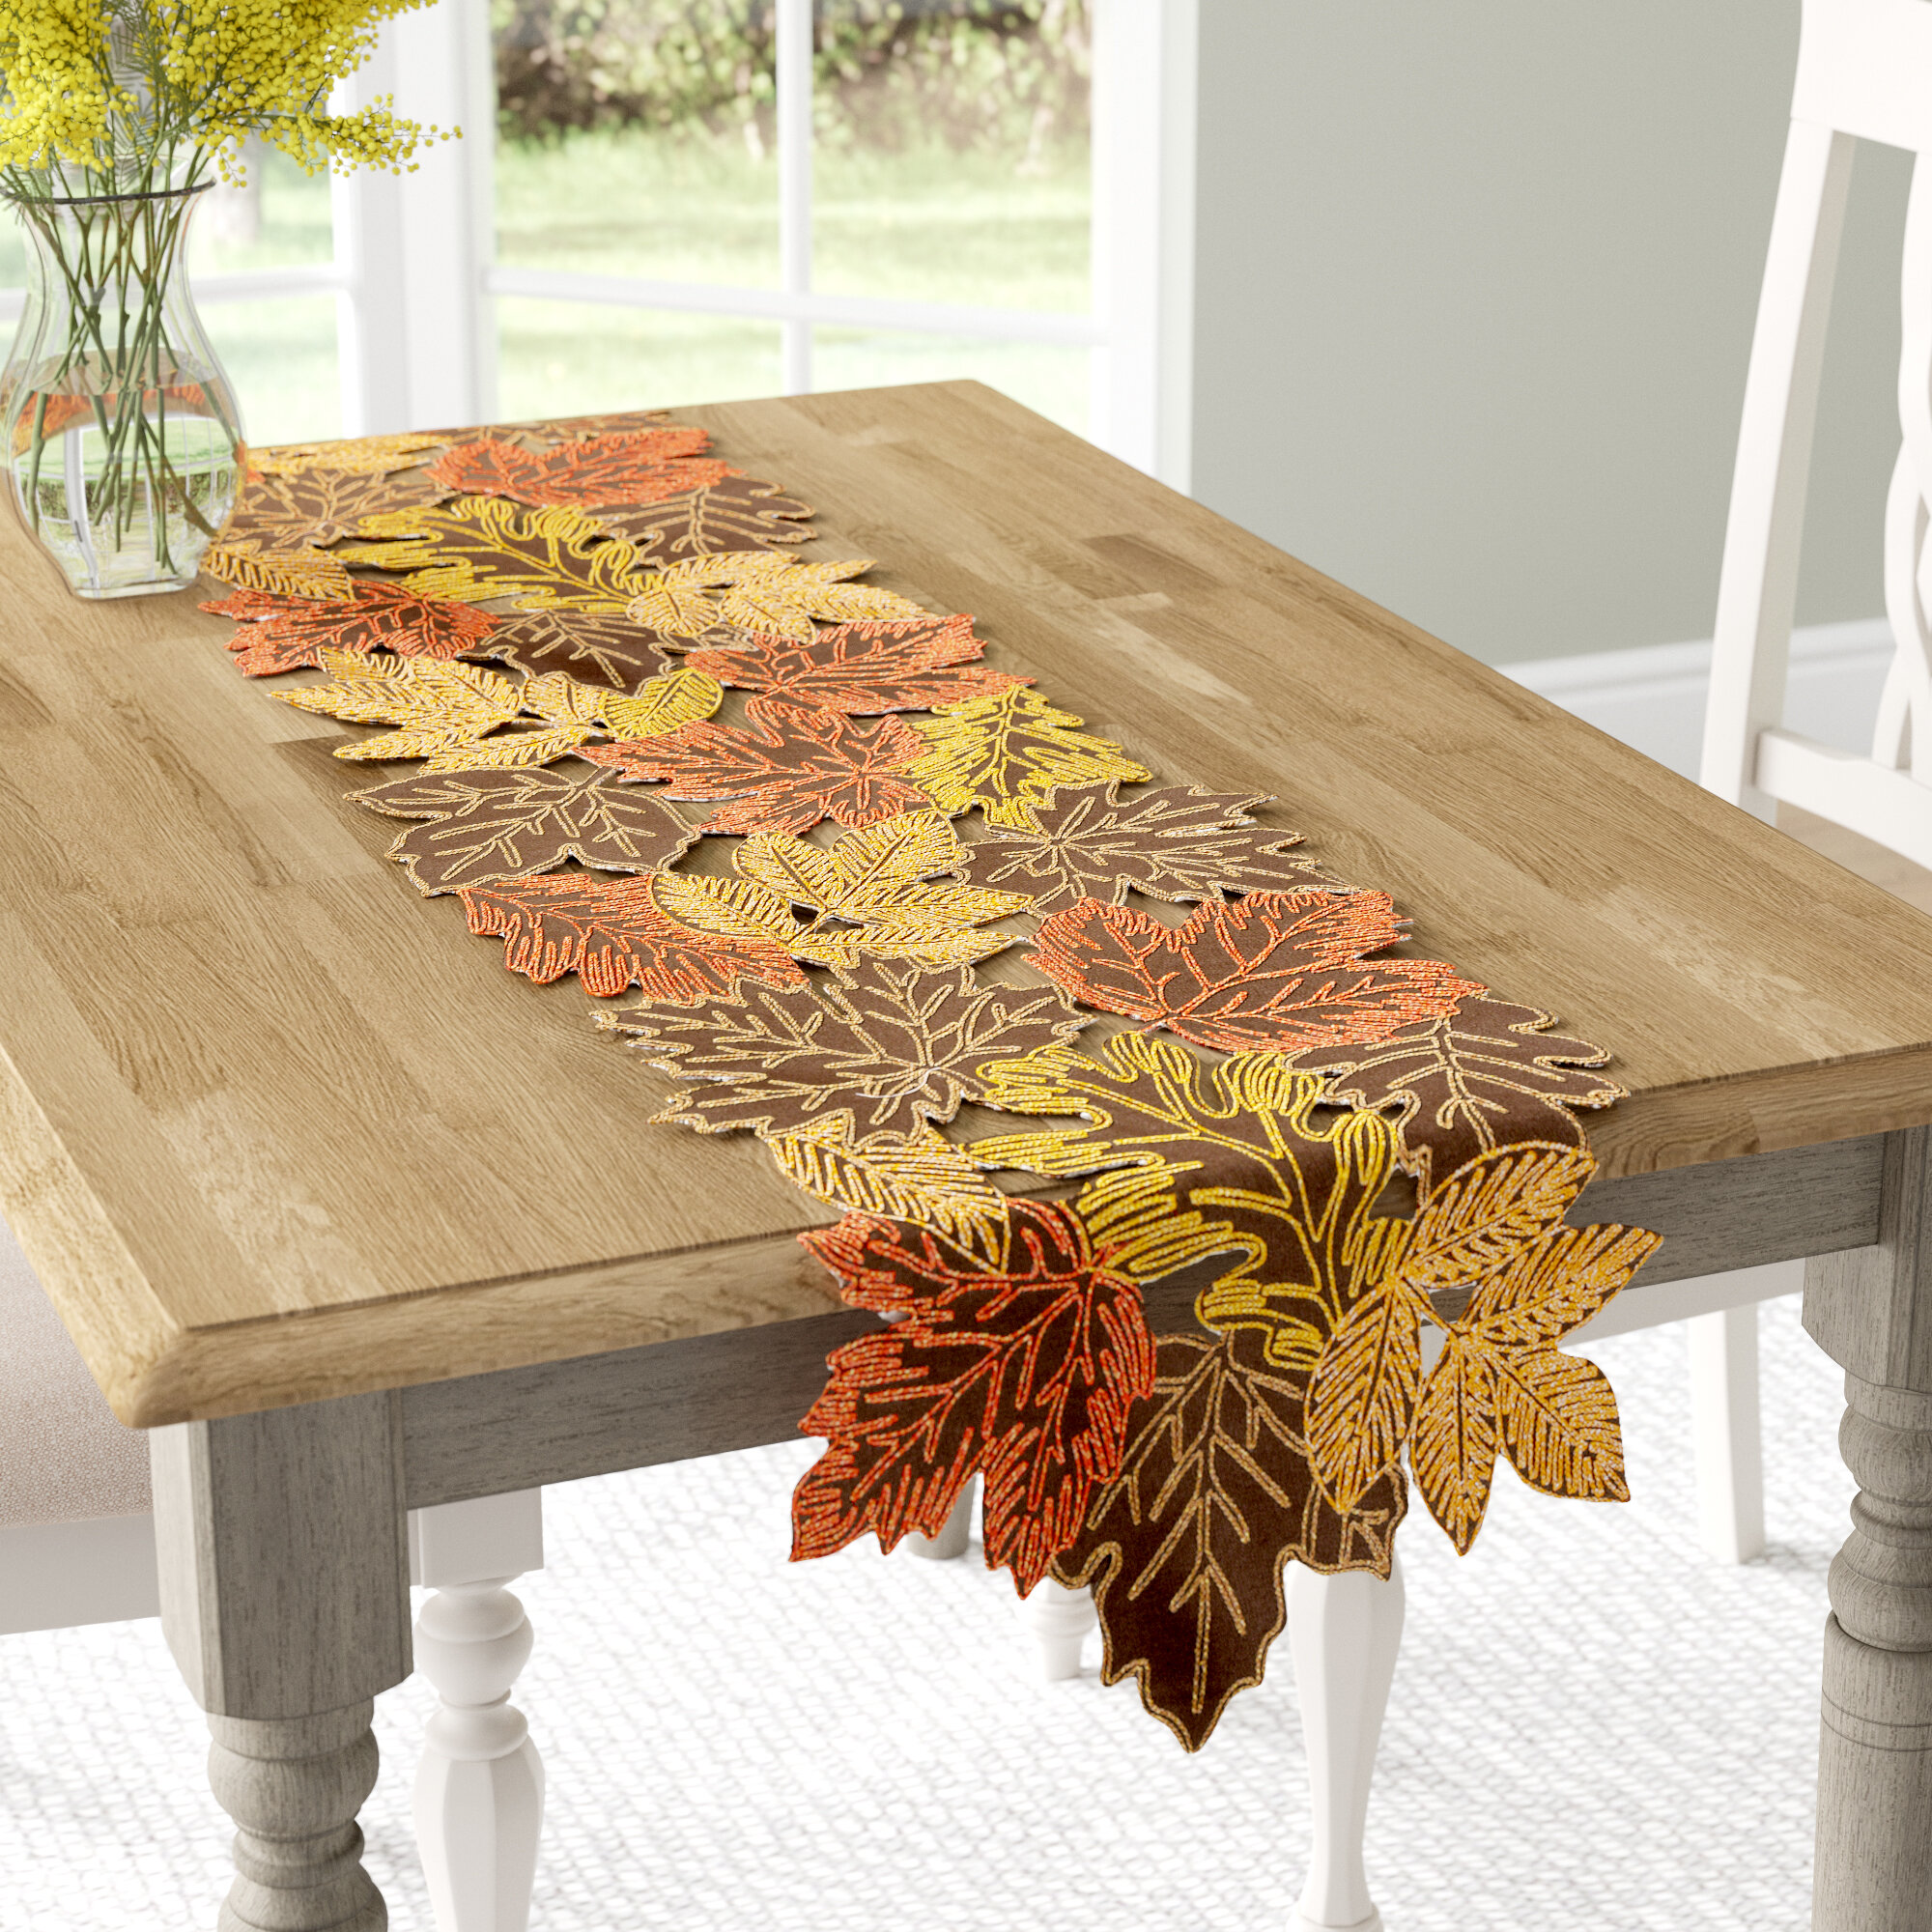 16 X 120 Pale Blue and White Dining Room Kitchen Rectangular Runner Ambesonne Autumn Table Runner Tree Leaves Motif Forest Fall Season Branches Nature Growth Illustration 